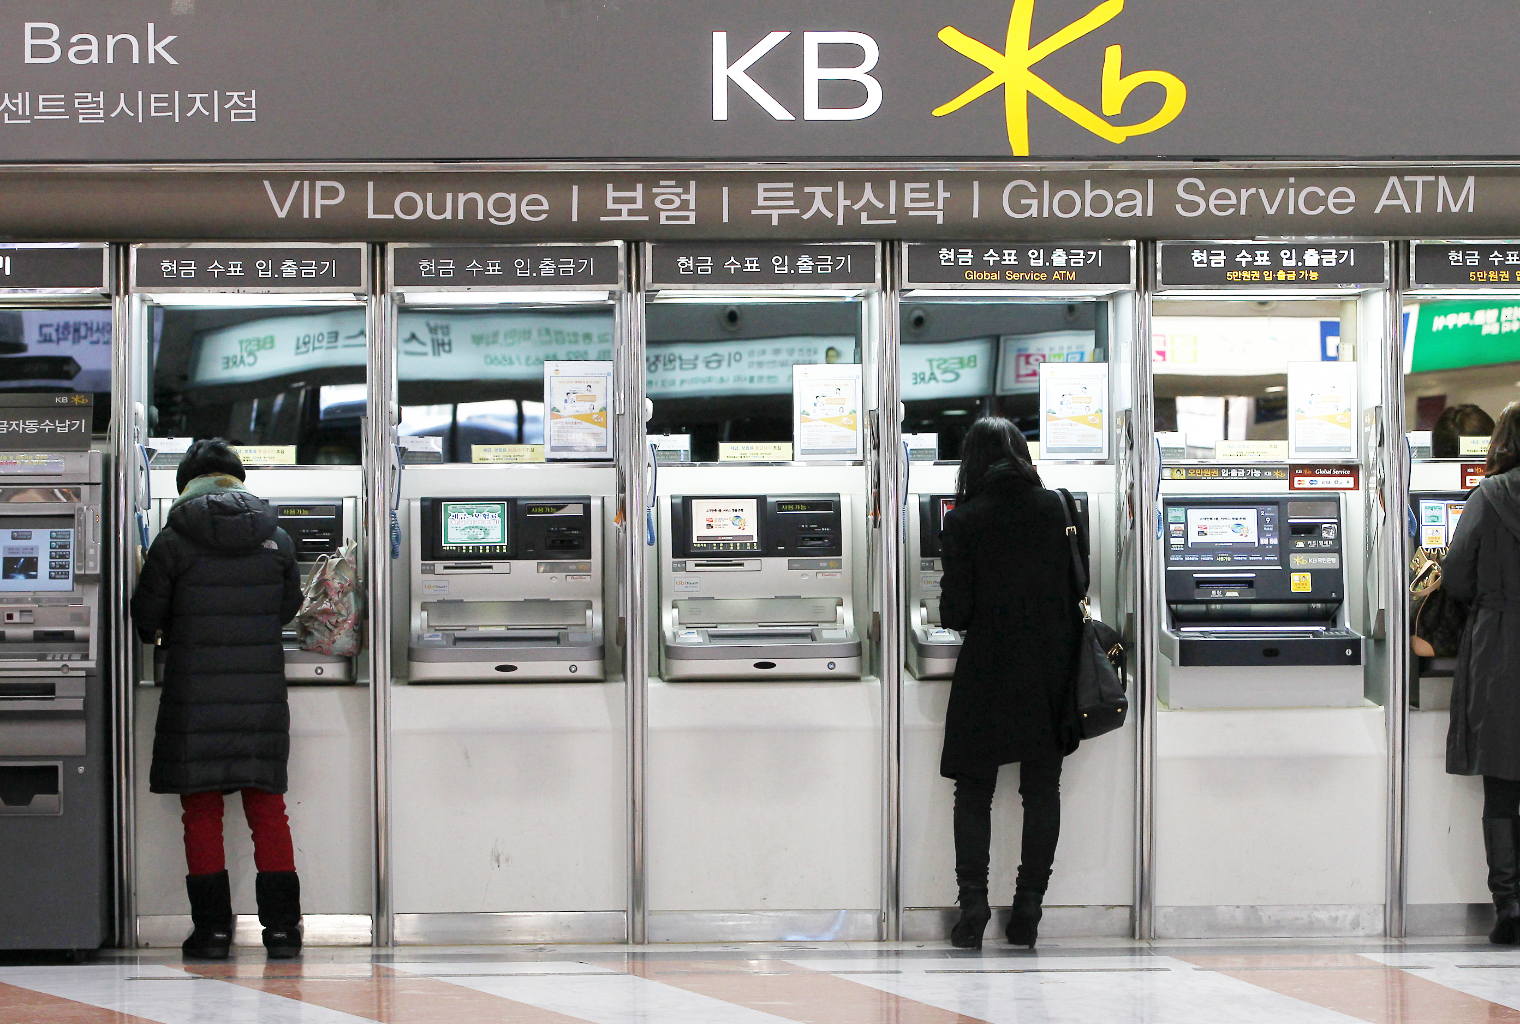 Major South Korean Bank Prepares To Launch Crypto Services As Government Green Lights Regulation